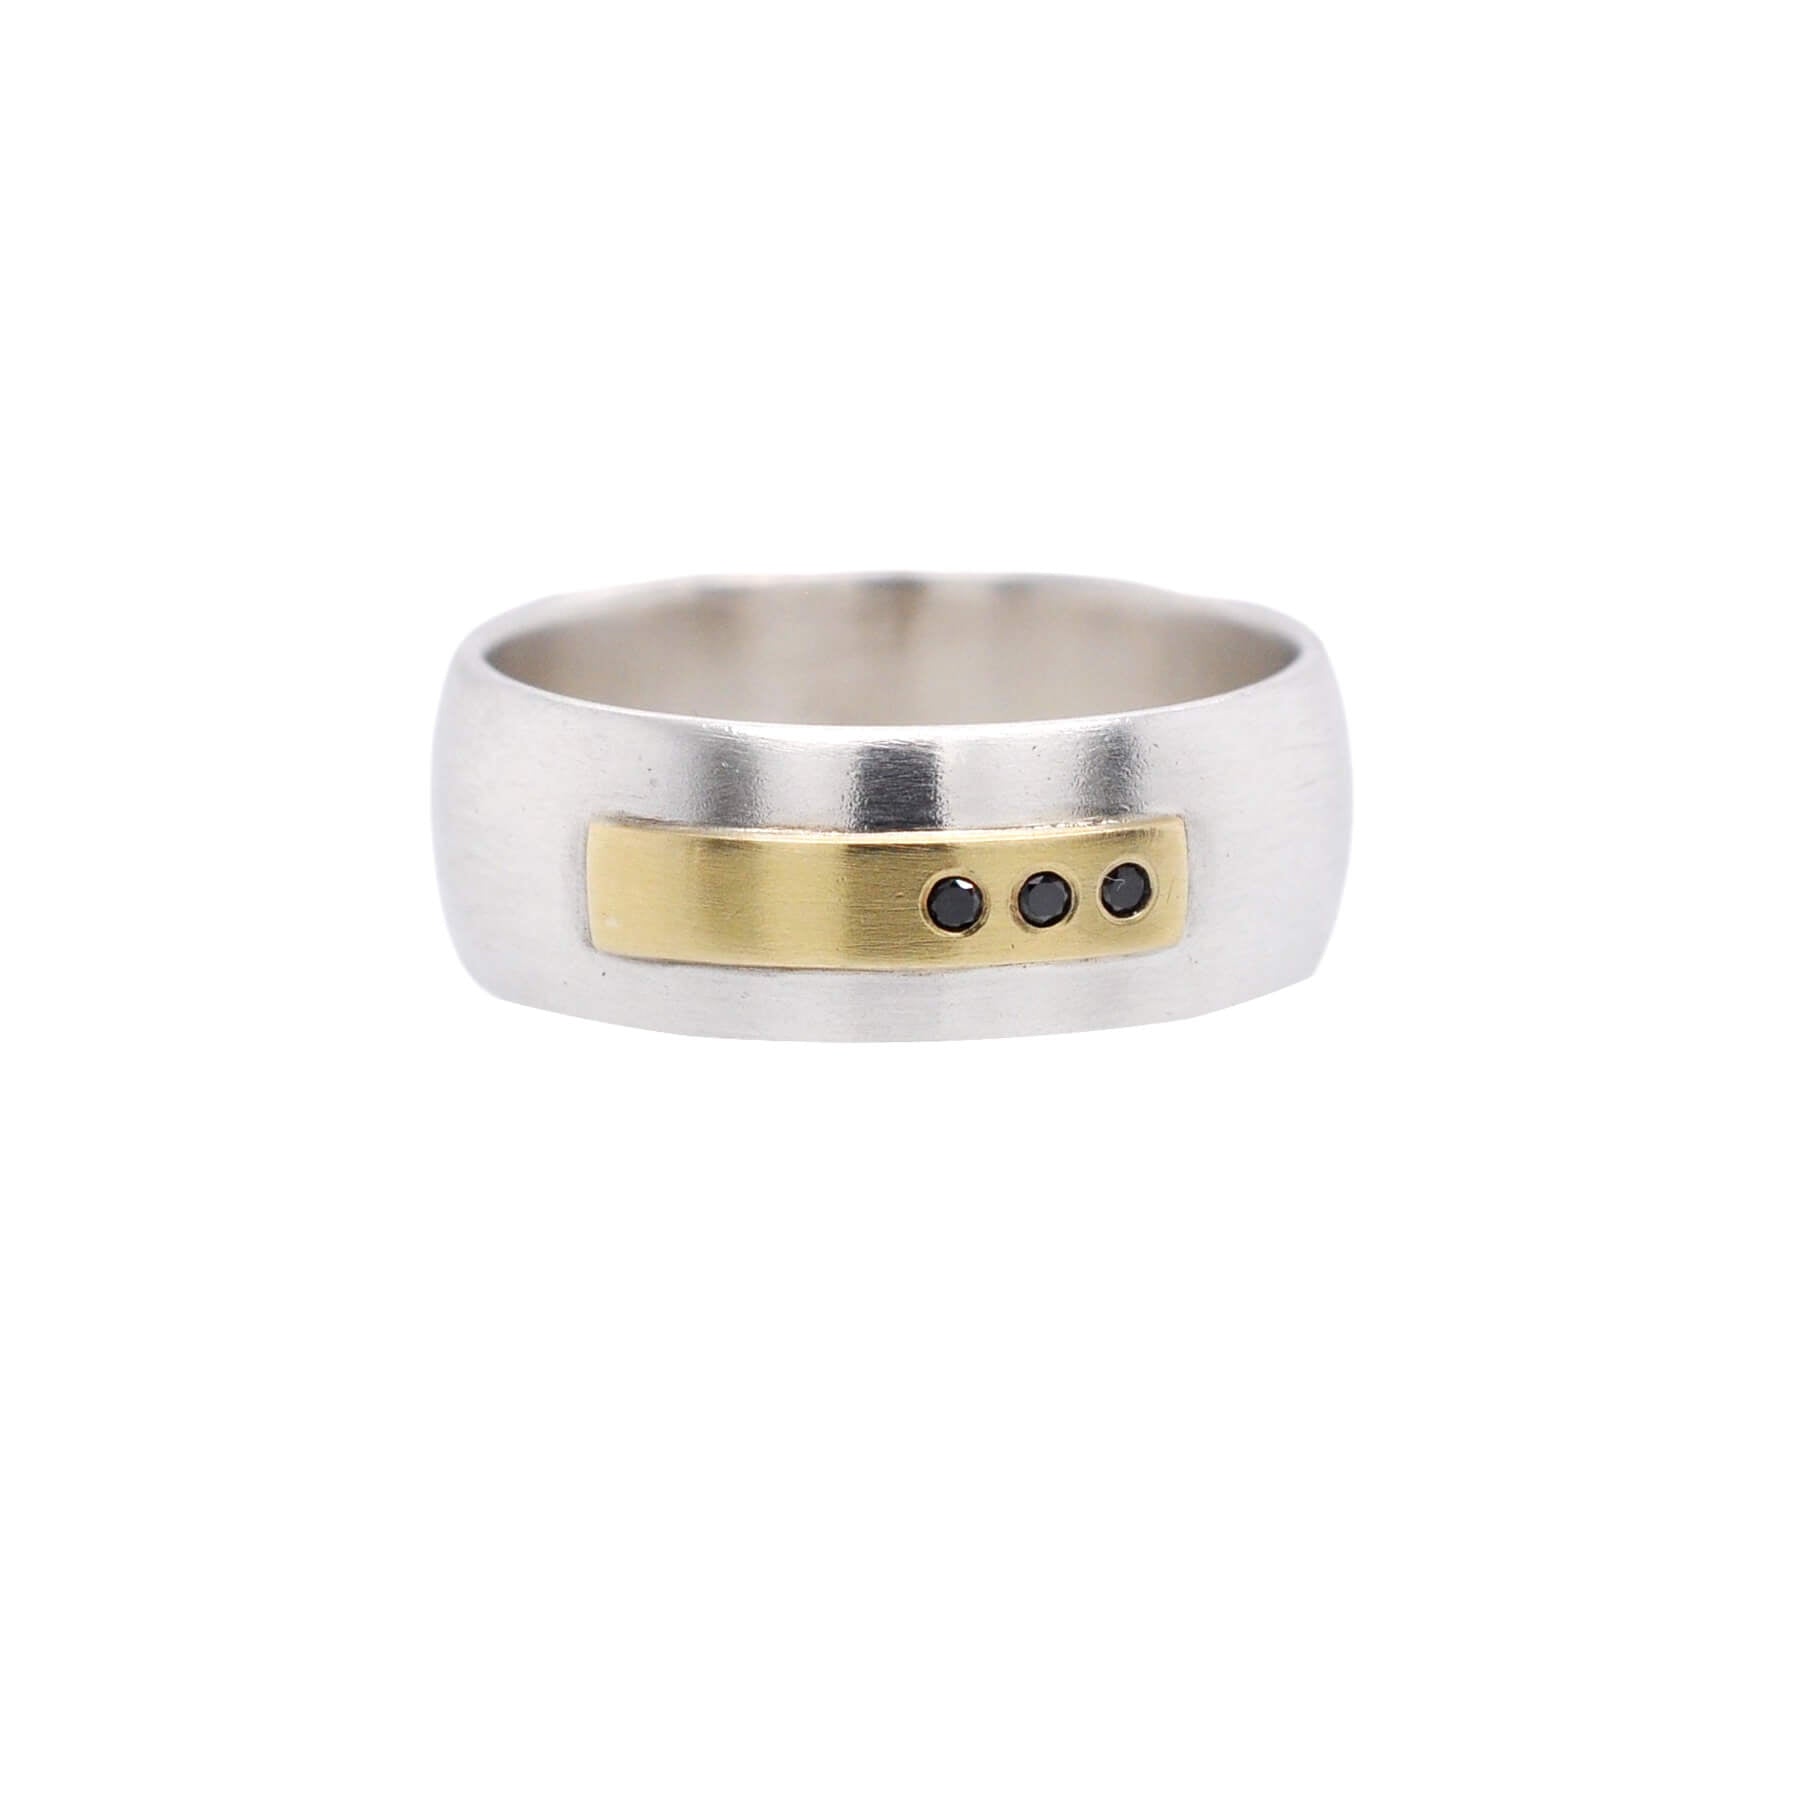 Low dome sterling silver band with yellow gold and black diamond accents. Handmade by EC Design Jewelry in Minneapolis, MN using recycled metal and conflict-free stones.